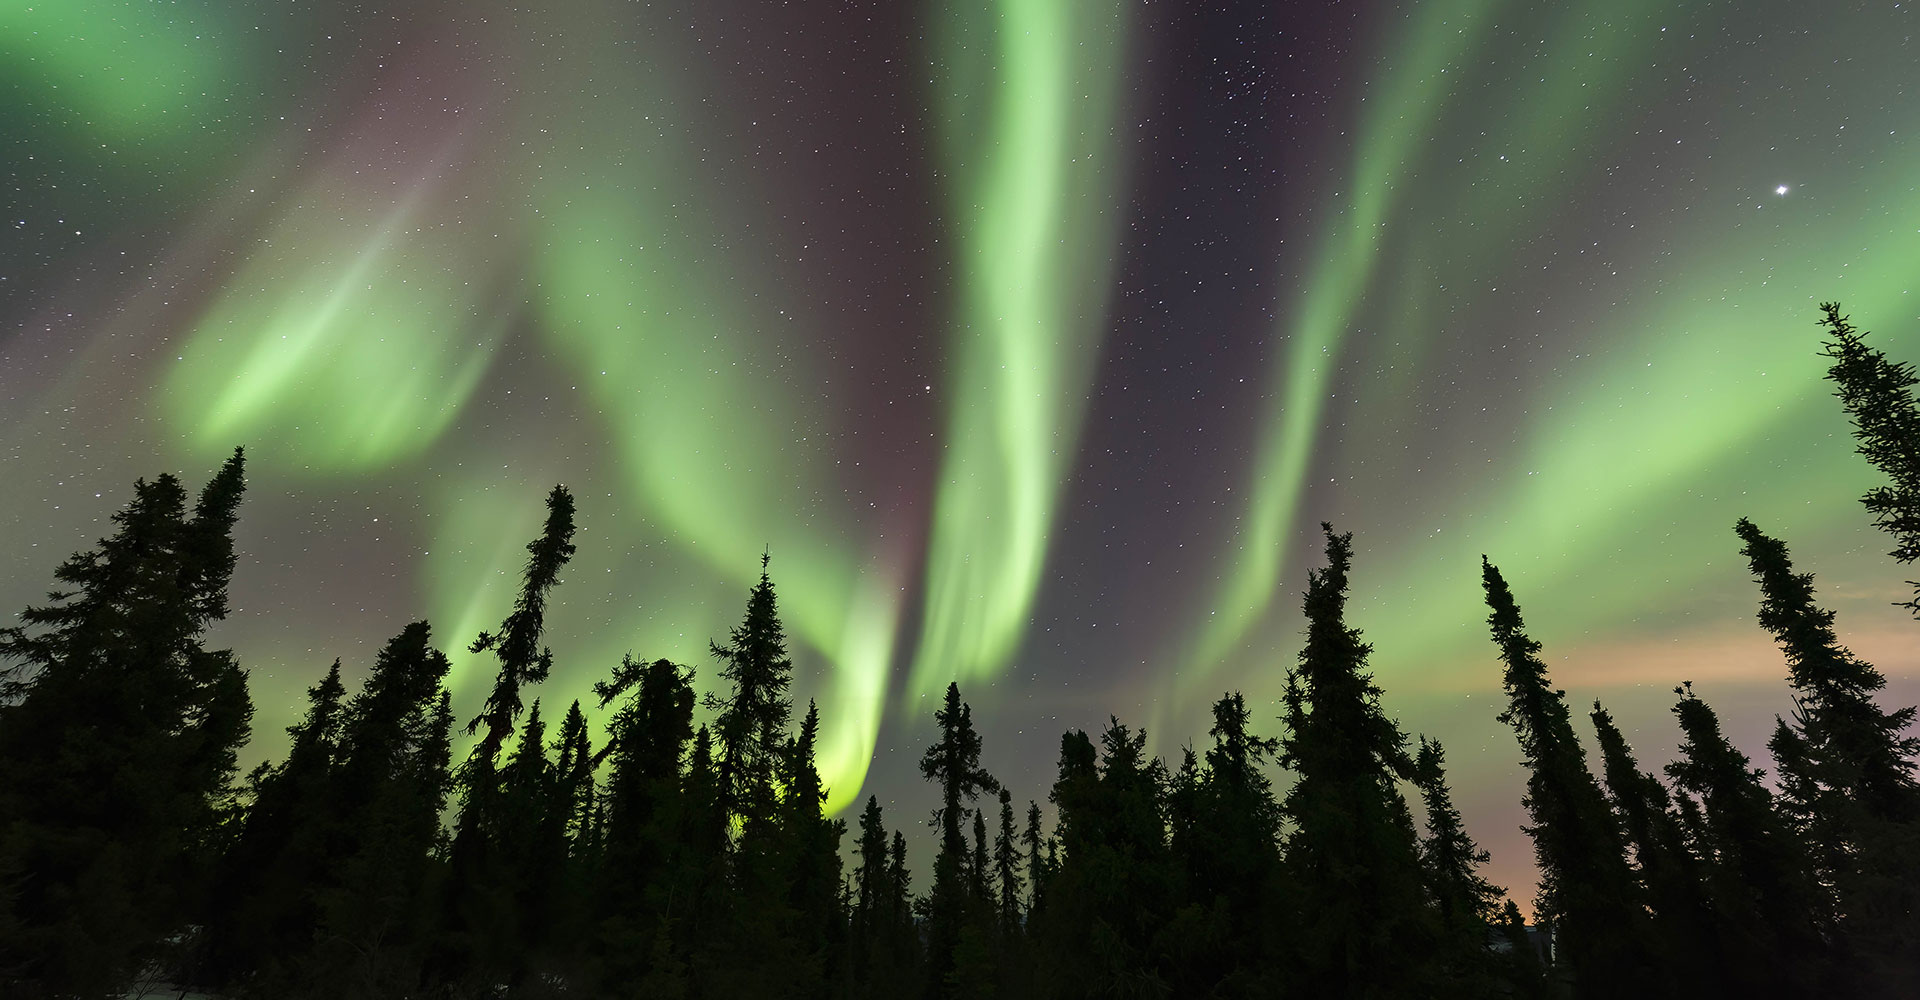 The Northern Lights viewed from the White Mountains National Recreation Area in Alaska. © Dominique Braud/TNC Photo Contest 2022